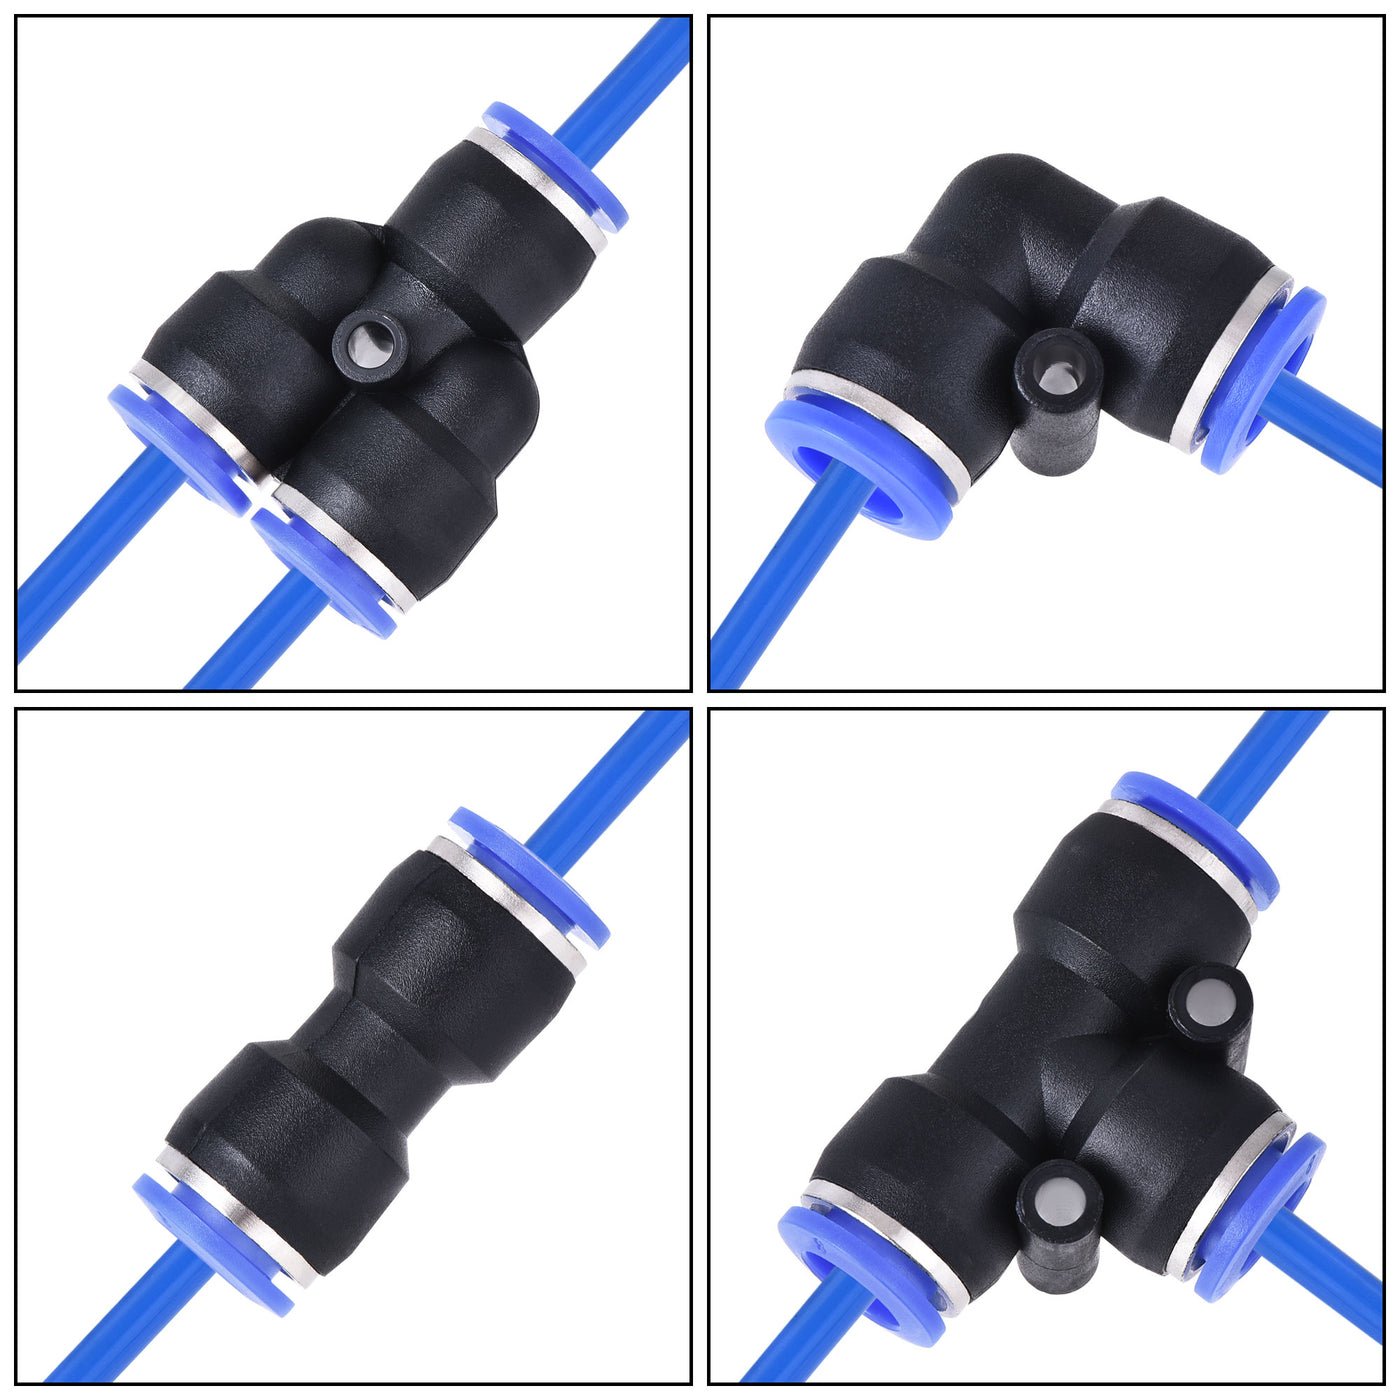 uxcell Uxcell Pneumatic PU Tubing Kit 8mm OD 10M Blue with 12 Pcs Push to Connect Fittings